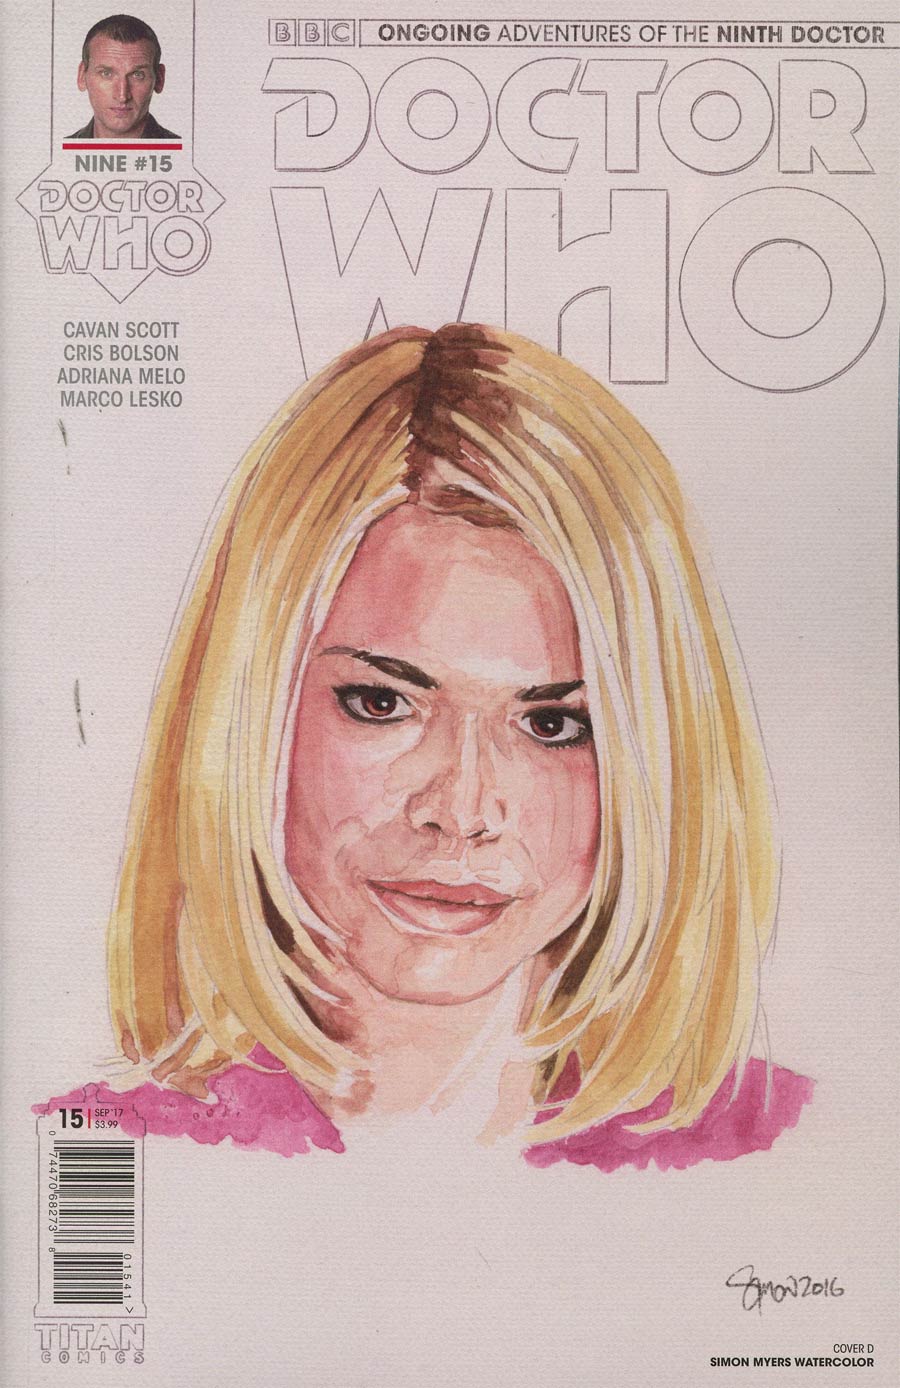 Doctor Who 9th Doctor Vol 2 #15 Cover D Variant Simon Myers Watercolor Cover